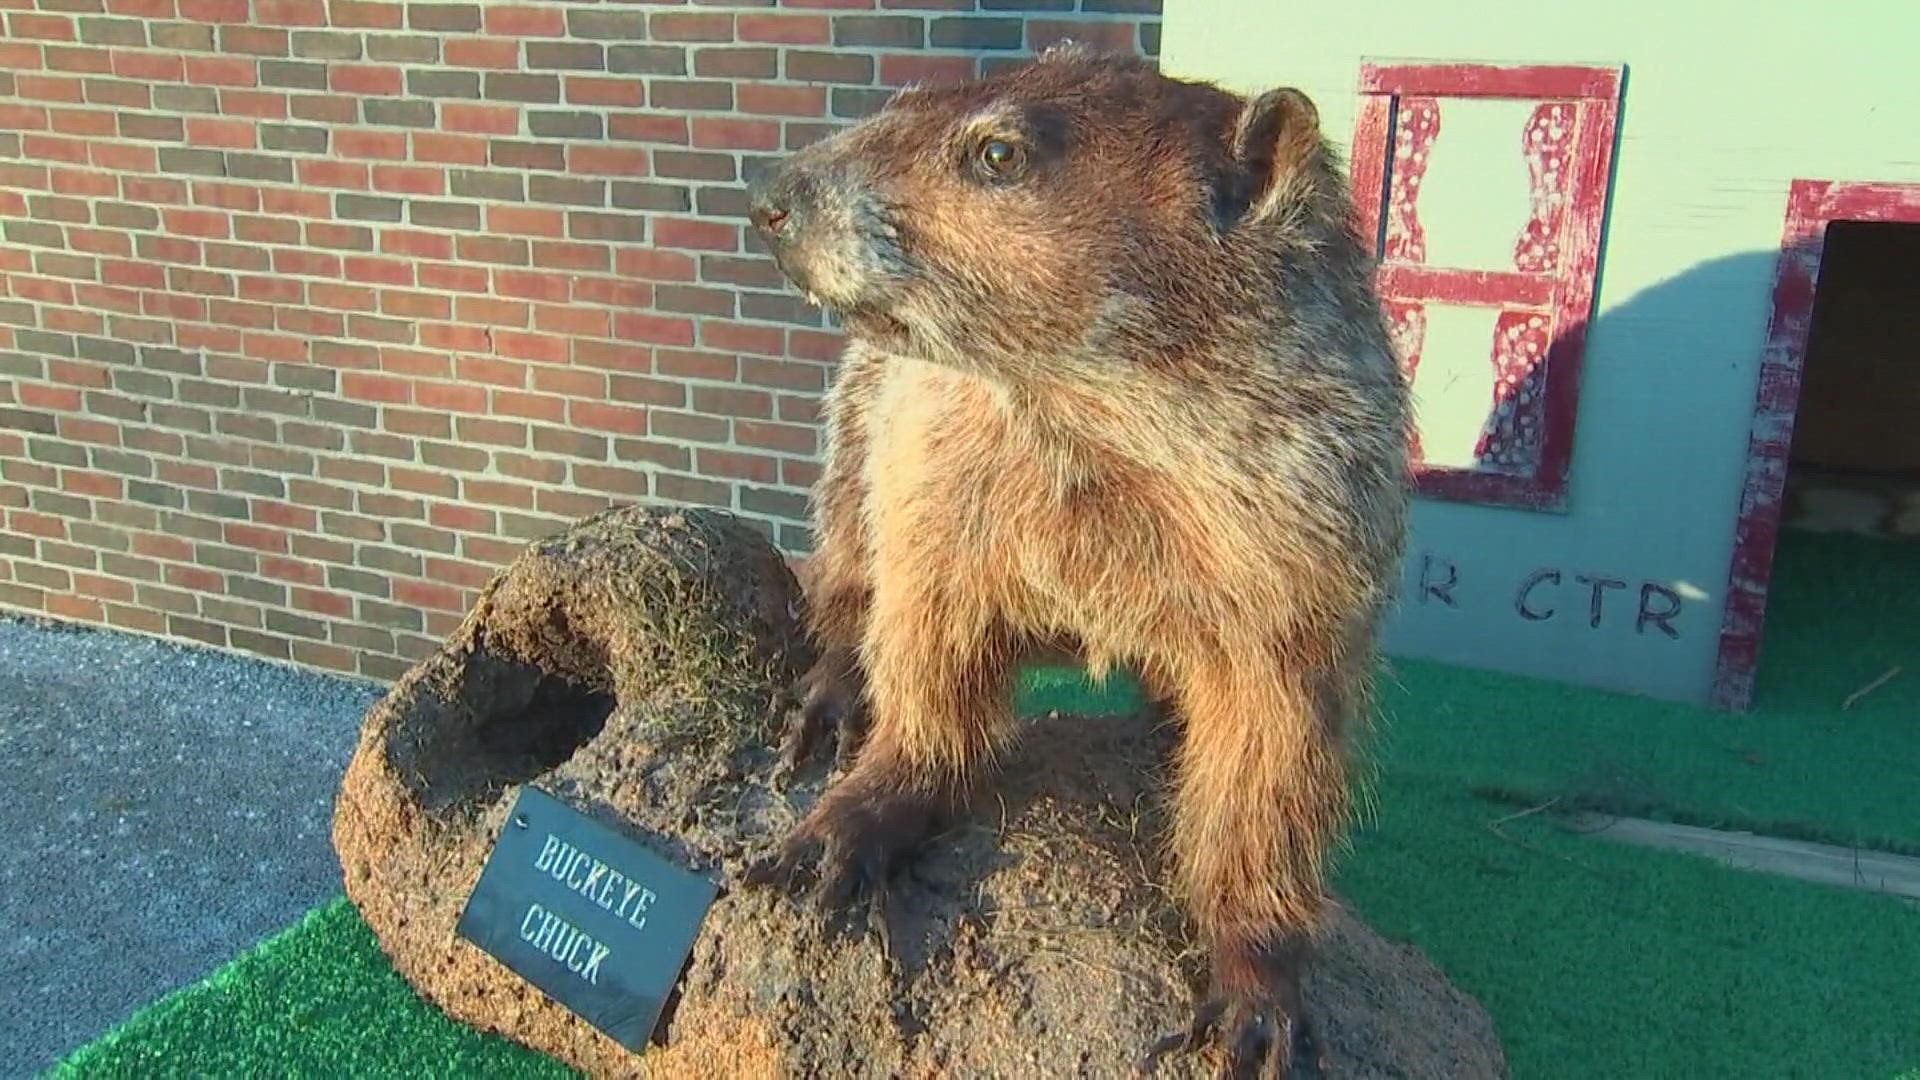 Buckeye Chuck's prediction is the same as his friend in Pennsylvania, Punxsutawney Phil, who predicted a long winter.